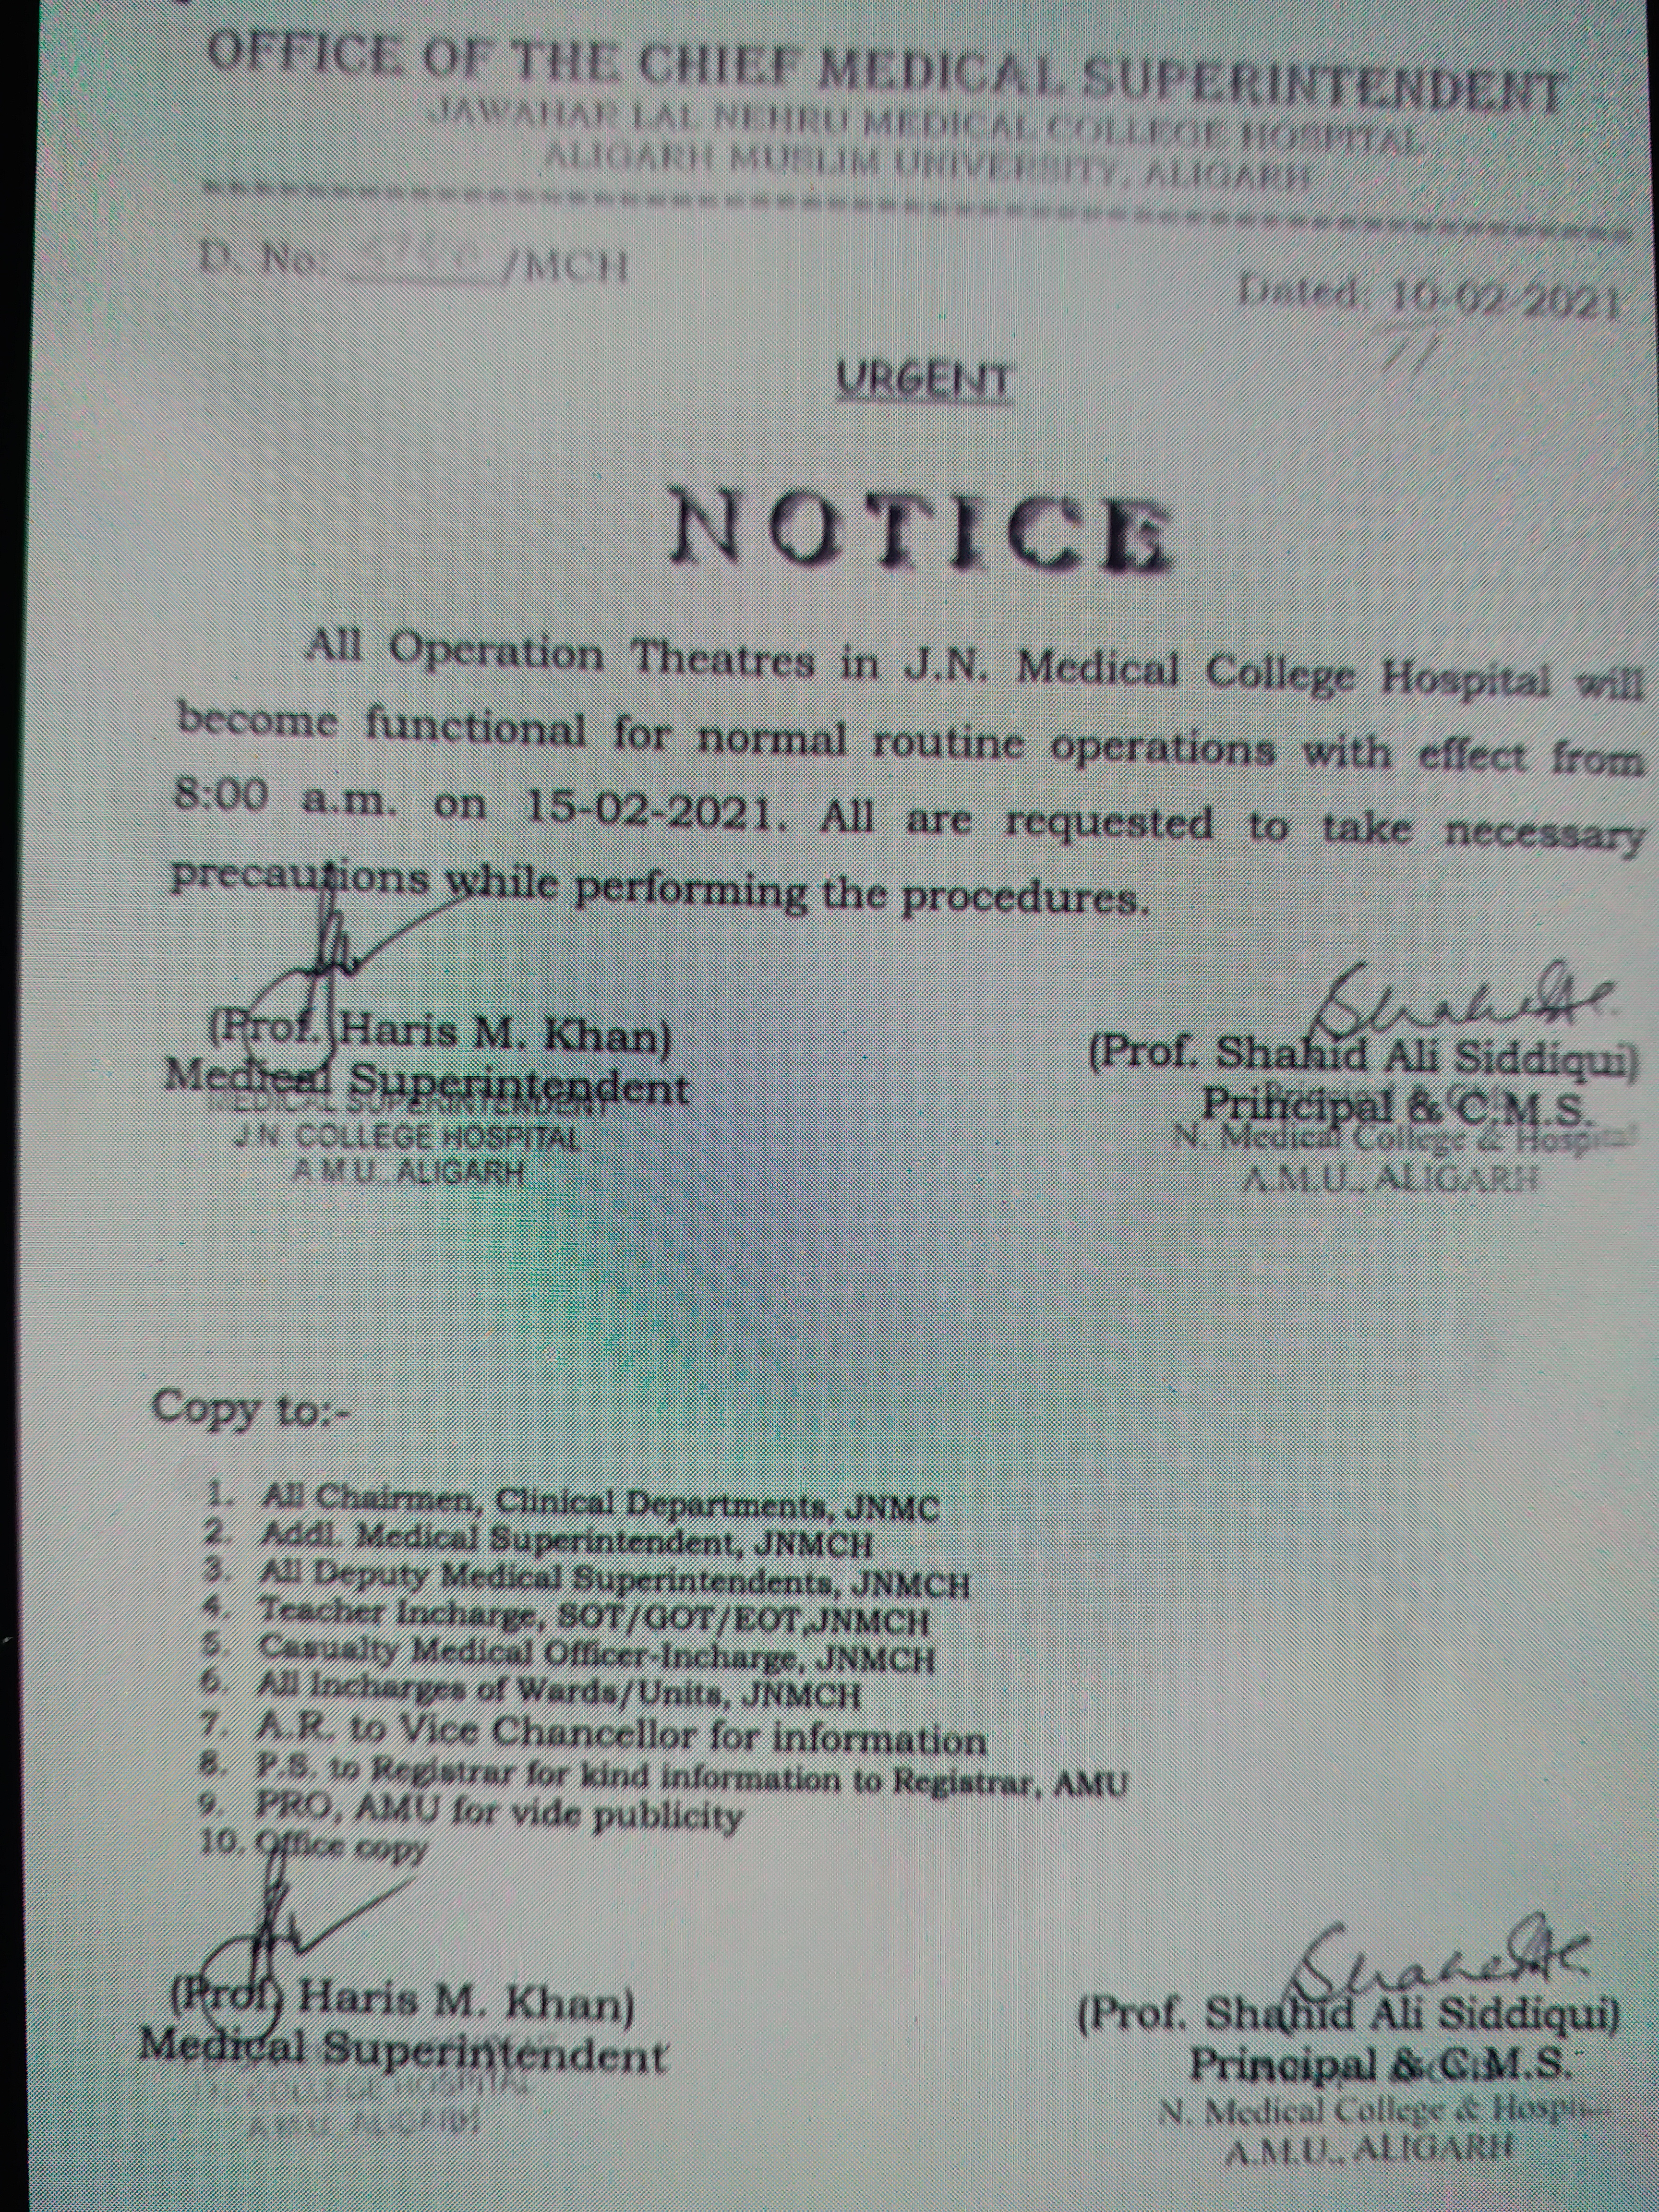 new OPD schedule at AMU medical college will come into effect from february 15